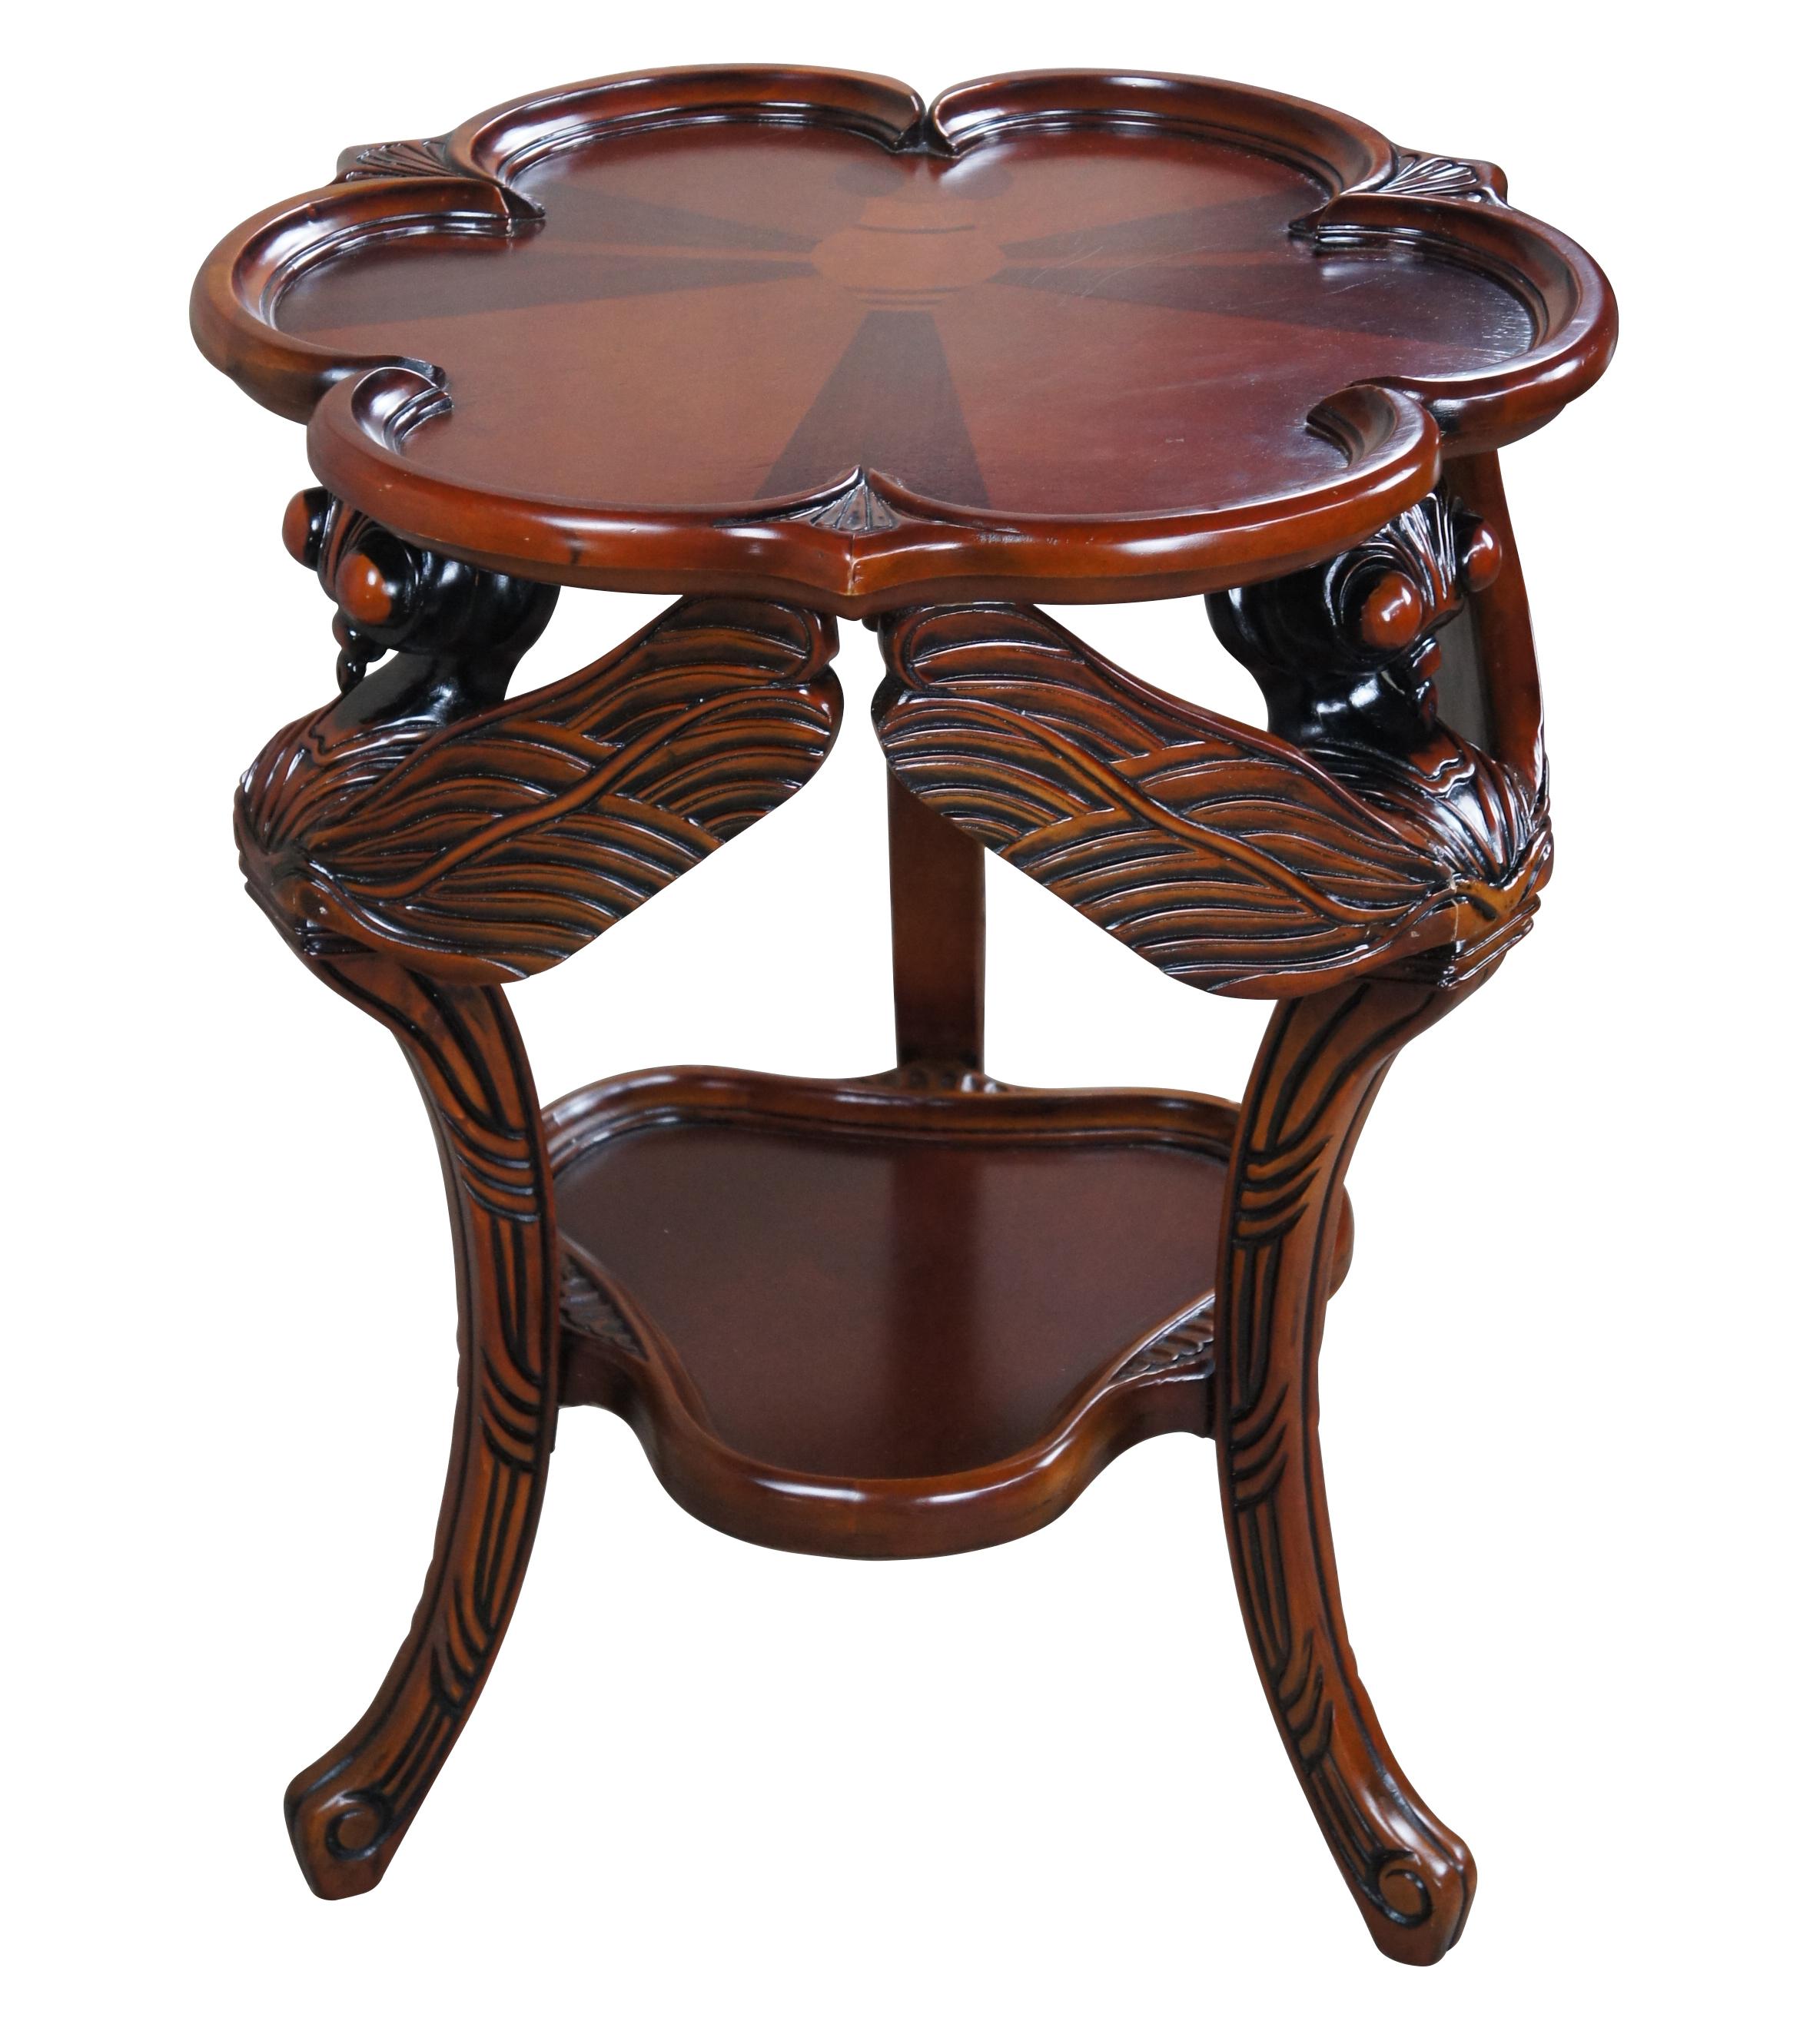 Fraught with French Art Nouveau style, this quality, mahogany occasional table was originally designed in 1900 by noted furniture designer Emile Galle. Features oversized dragonflies' heads and stretched wings, requiring a full week to hand-carve,